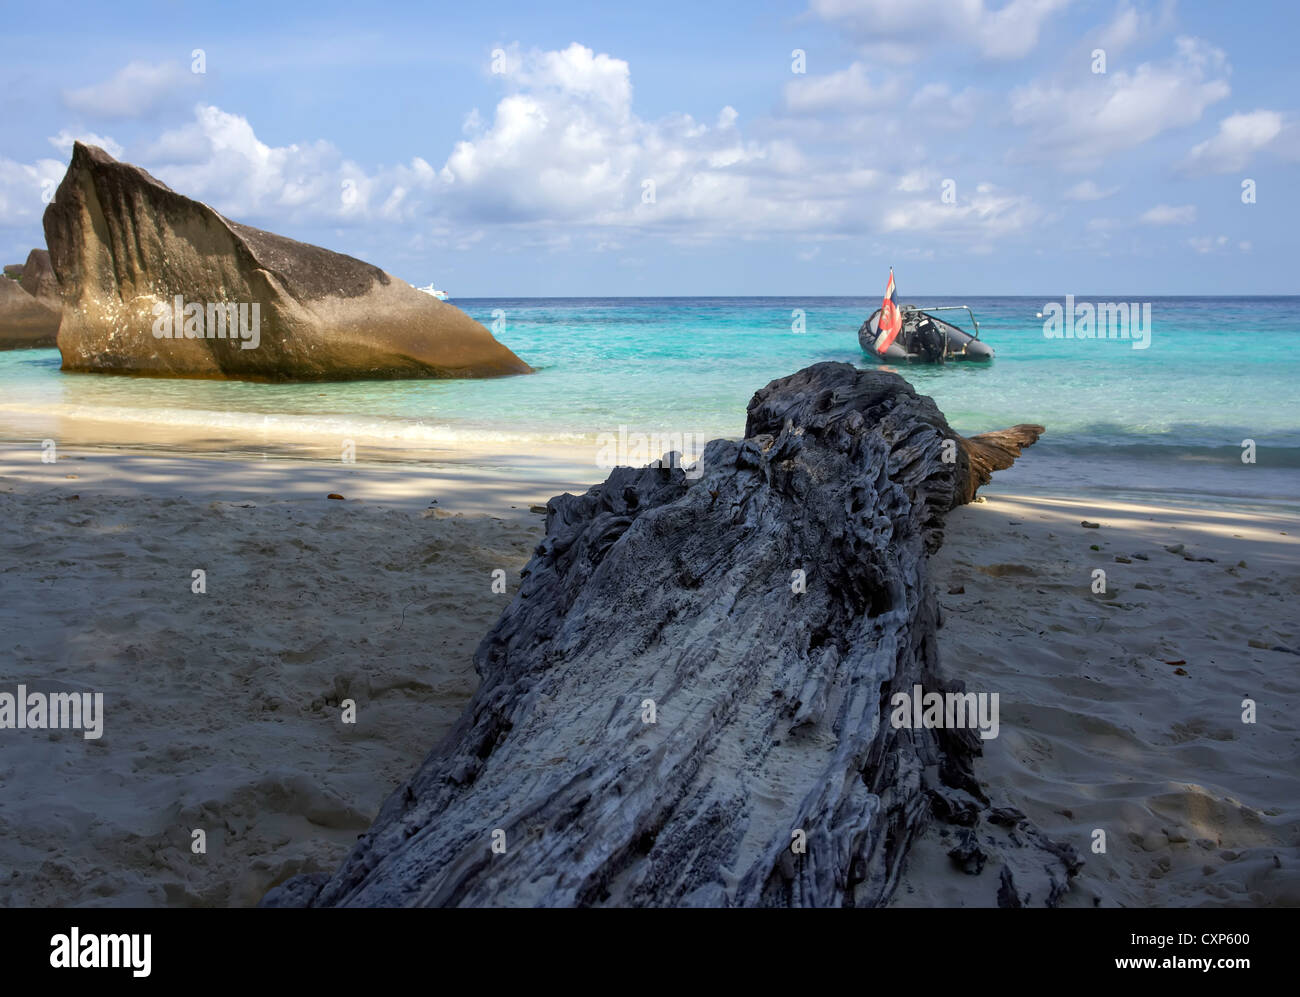 Coastal cliffs and beaches of the Similan Islands in Thailand Stock Photo